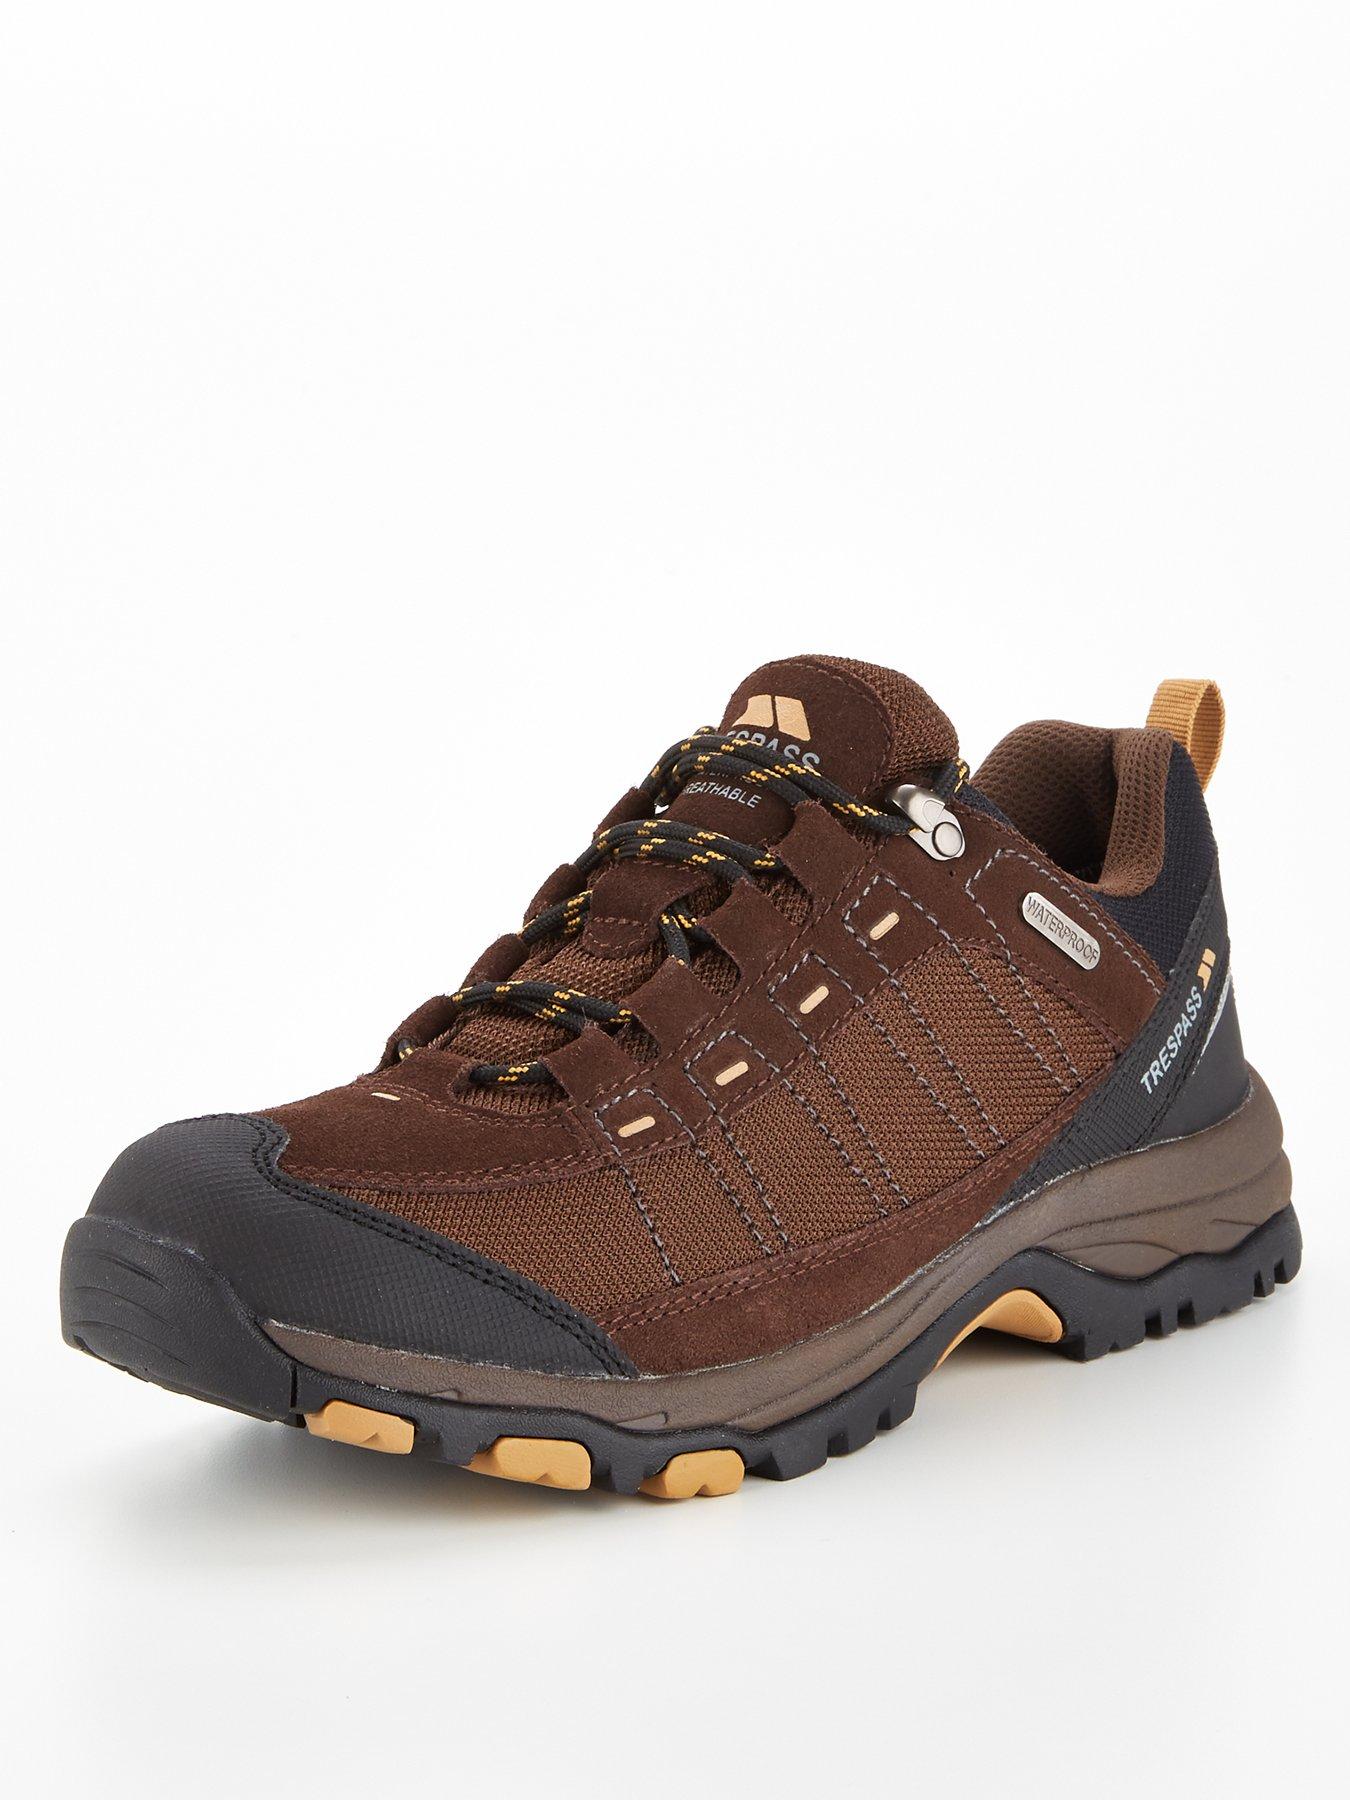 Shoes & boots Scarp Low Walking Trainers - Dark Brown